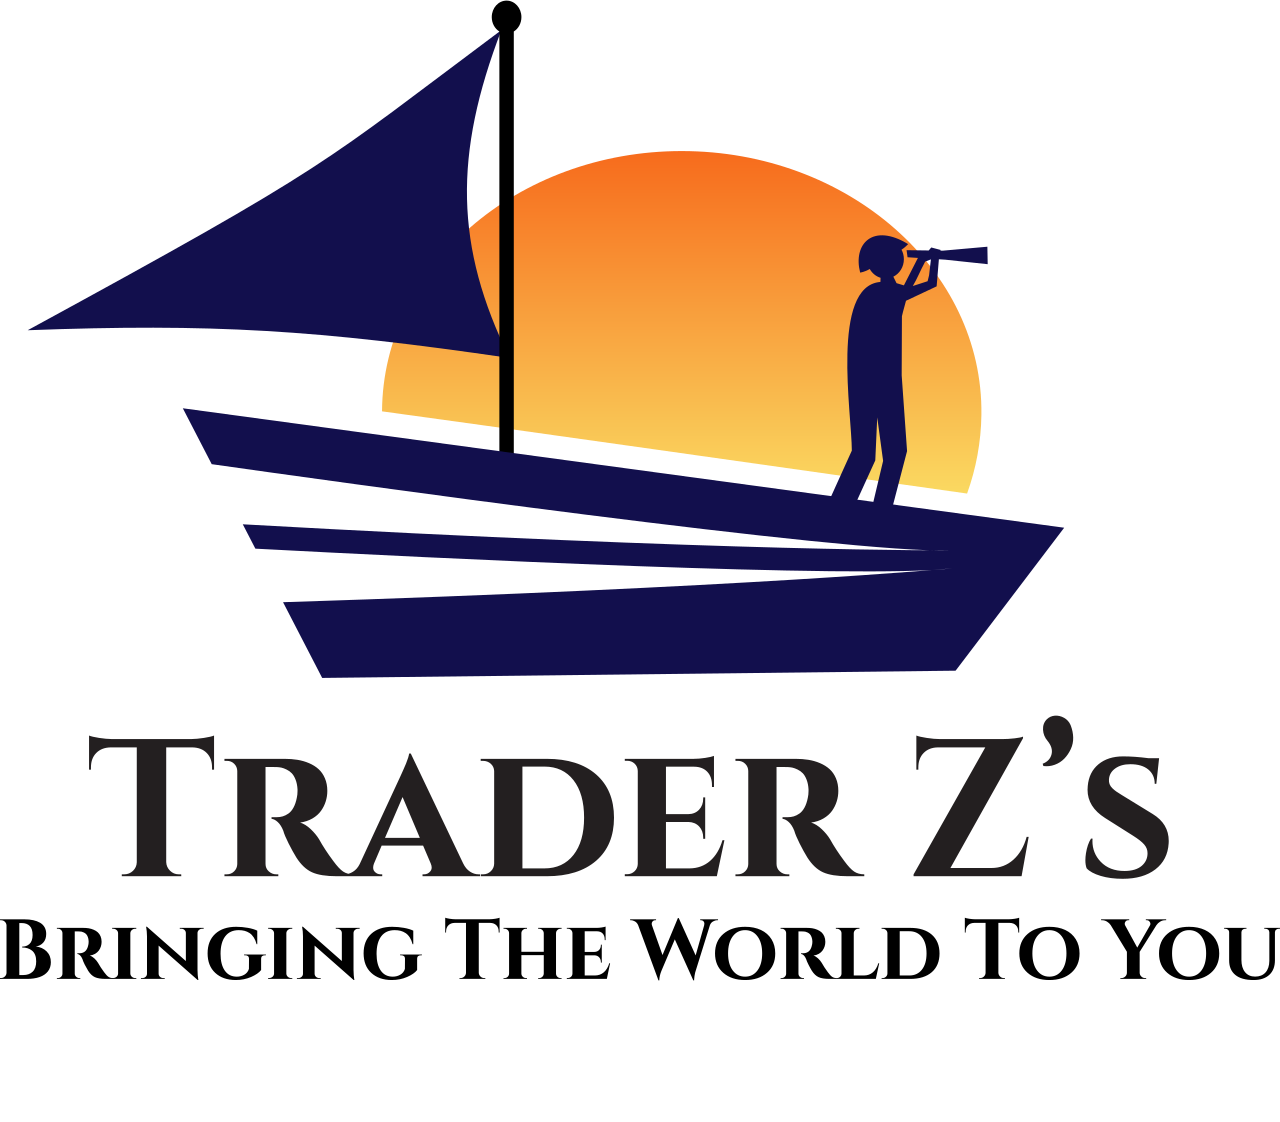 Trader Z’s 's web page